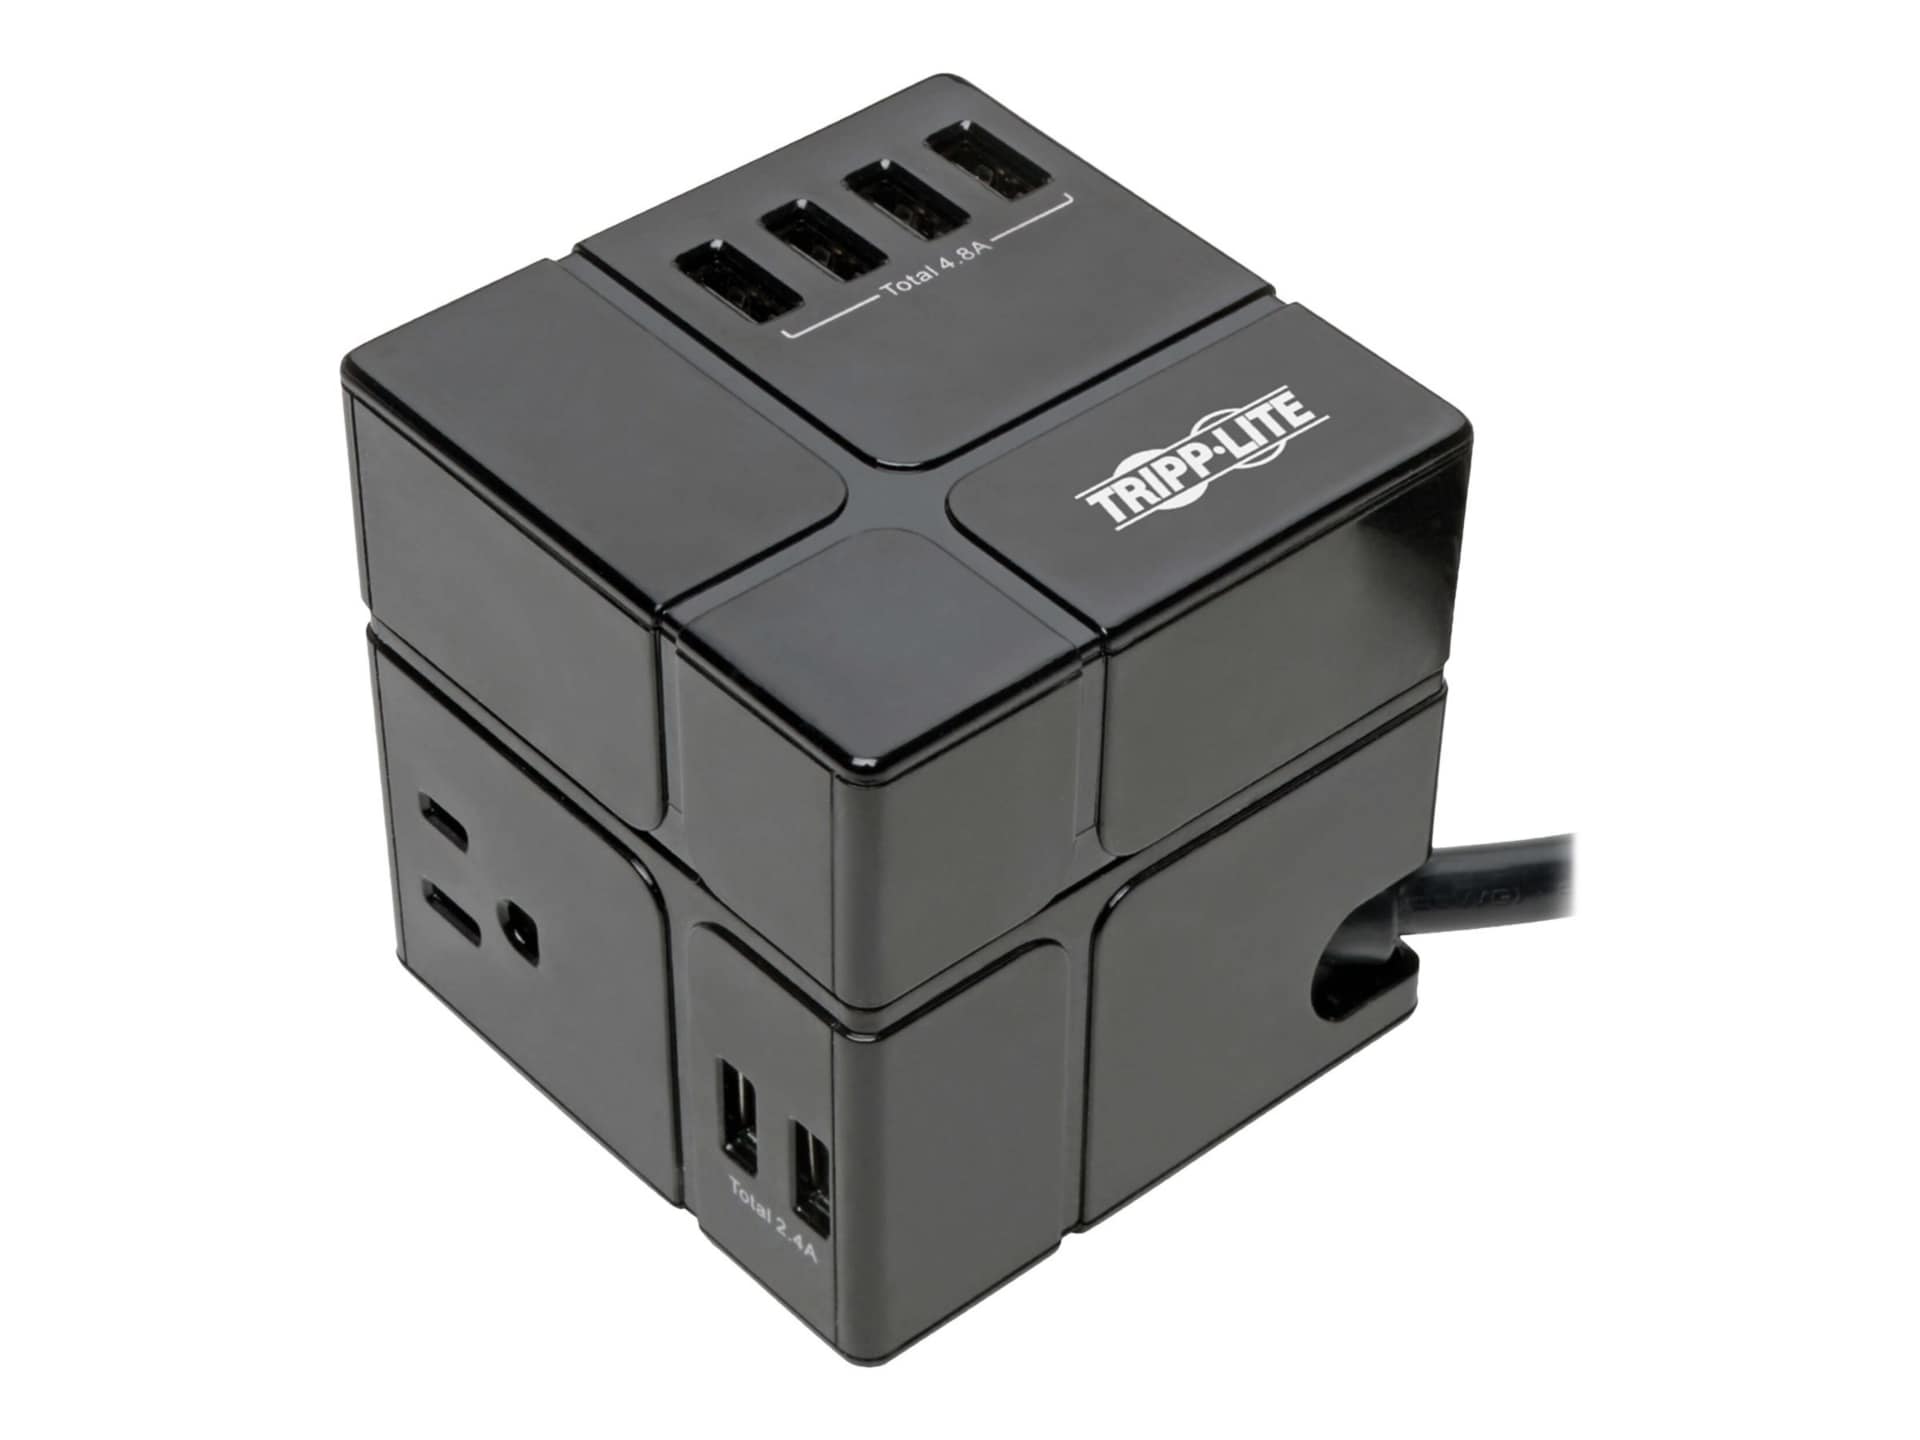 Tripp Lite Surge Protector Power Cube 3-Outlet 6 USB-A 7.2A 6ft Cord Black 540 Joules - surge protector - 1800 Watt